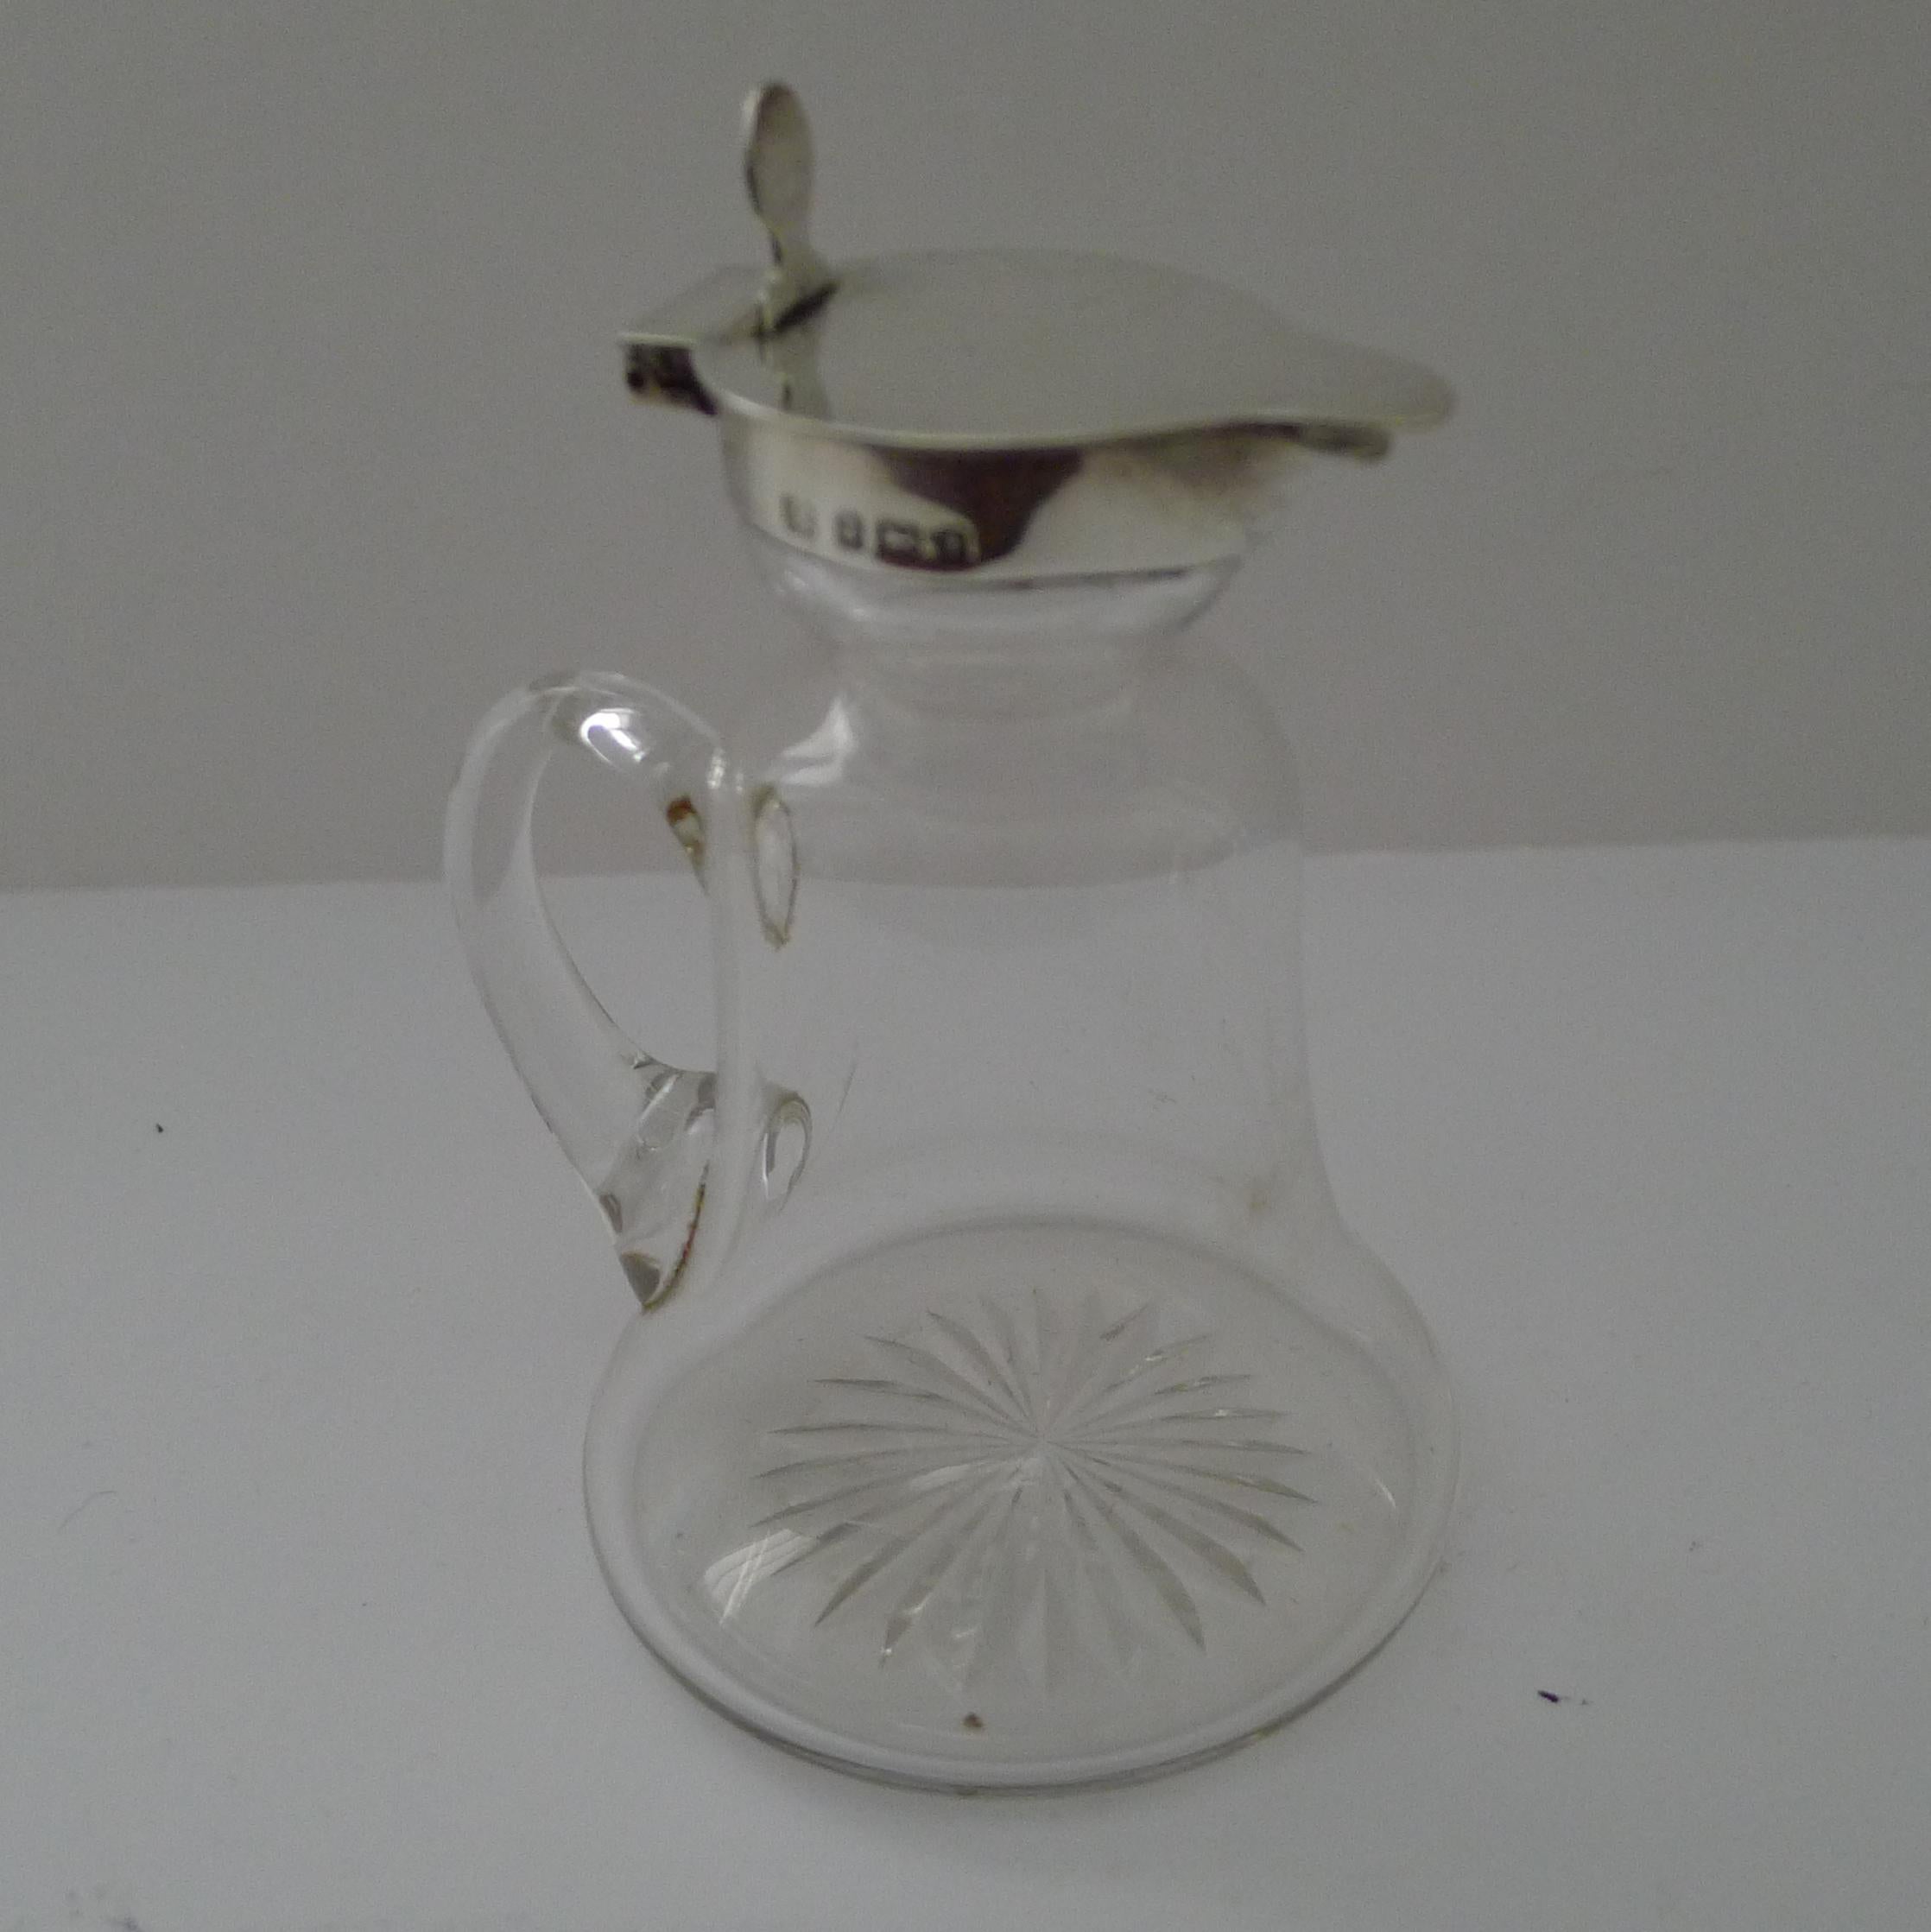 A charming little Edwardian Whisky Tot (also known as a Chotopeg) to accommodate a couple of measures of the spirit to take to bed.

The underside of the glass vessel is star cut and the collar and hinged lid is made from sterling silver fully